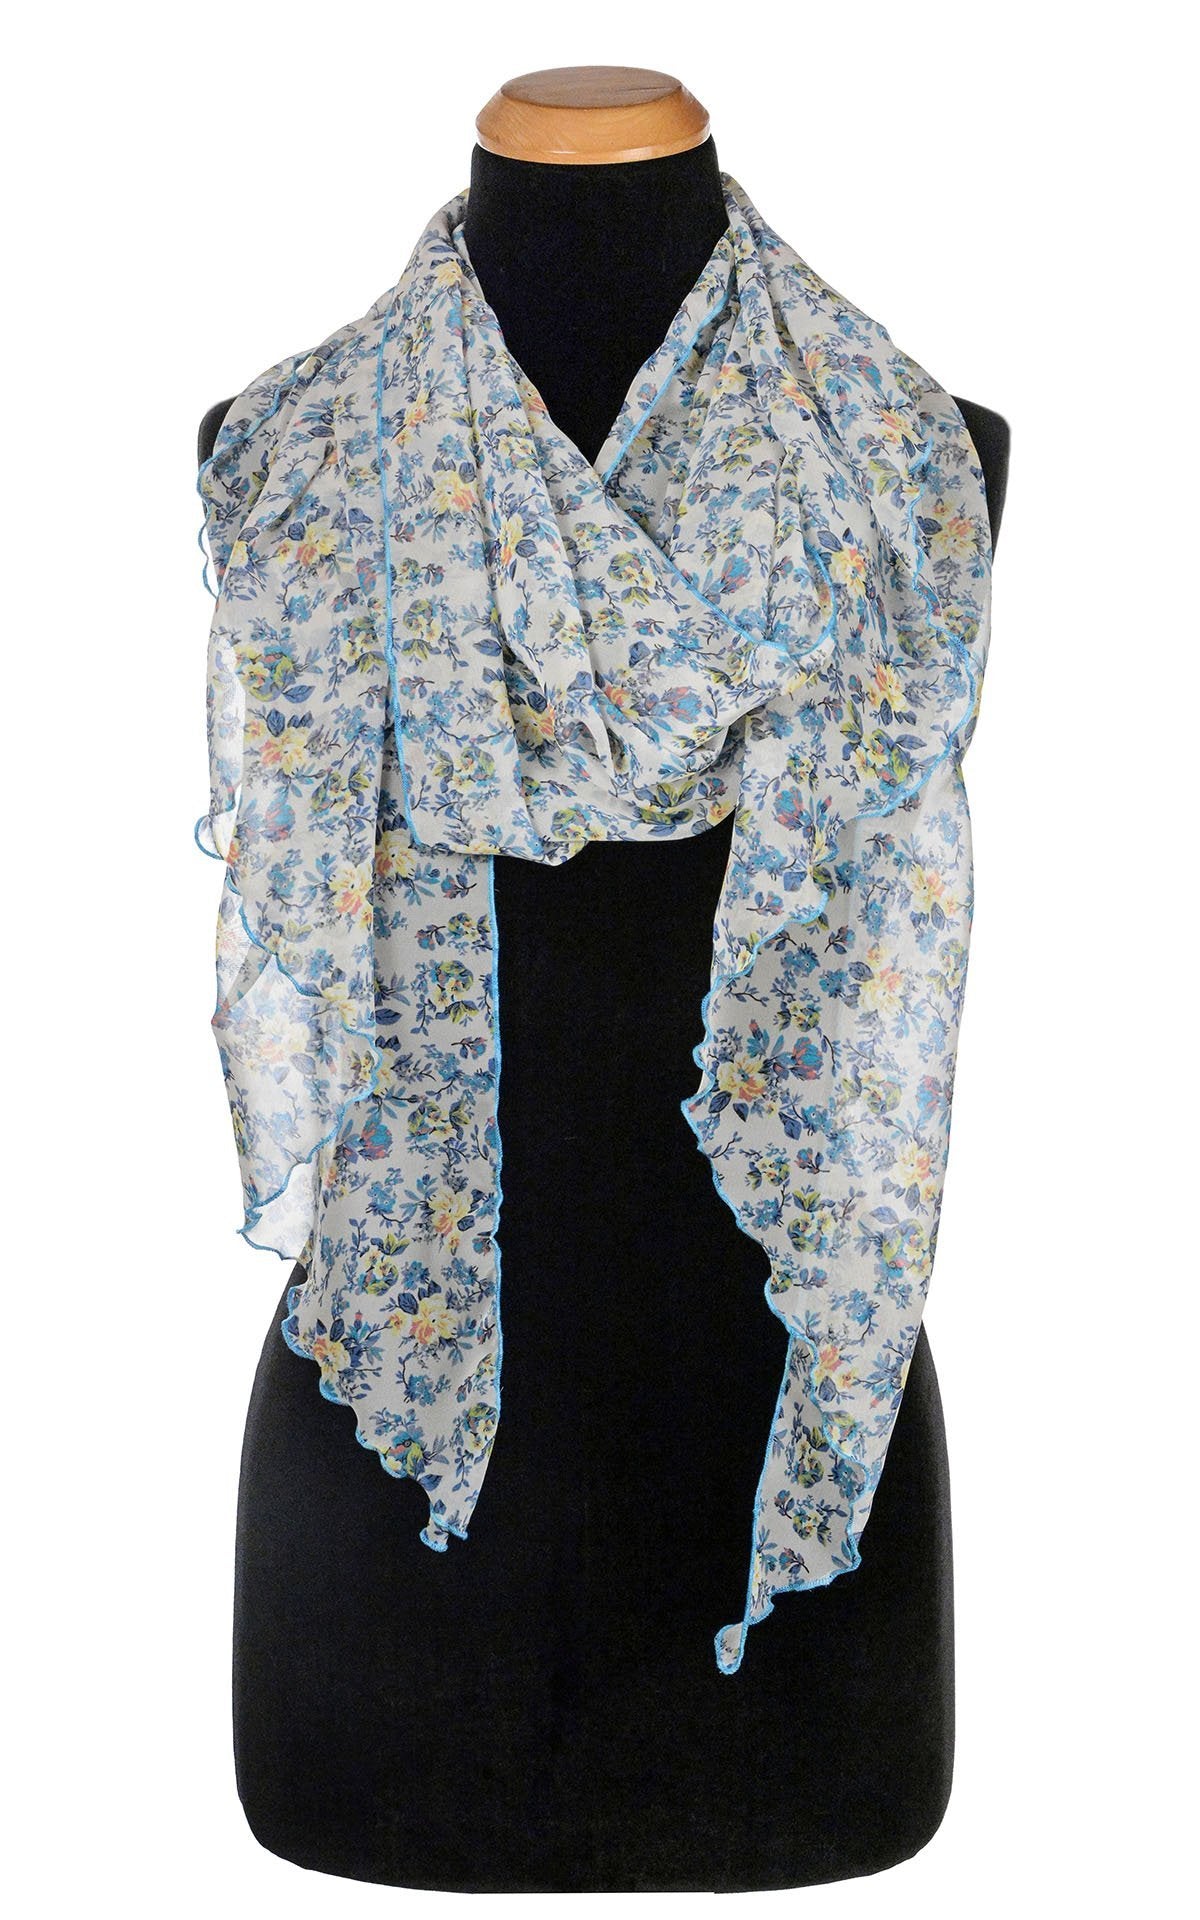 Ladies Large Handkerchief Scarf, Wrap on Mannequin shown looped | Victory Garden Chiffon floral print in blues and ivory| Handmade in Seattle WA | Pandemonium Millinery